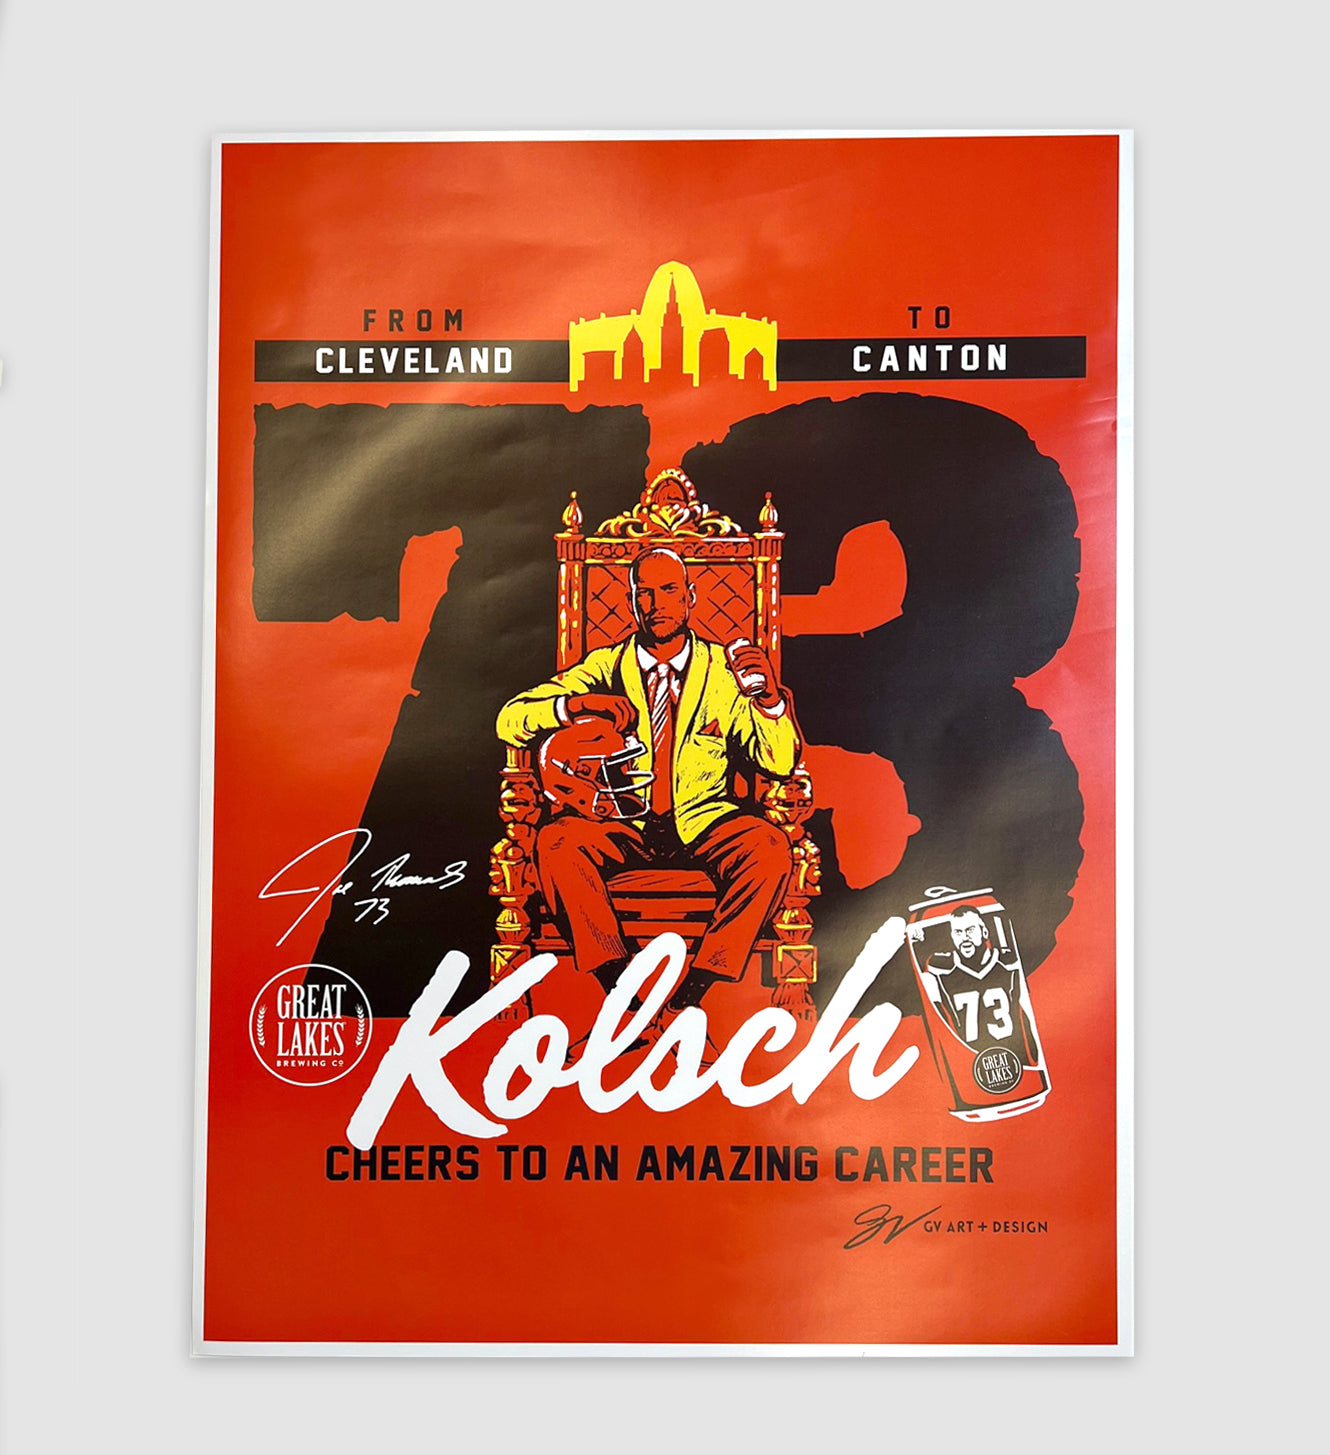 Cheers To An Amazing Career 73 Kolsch Poster